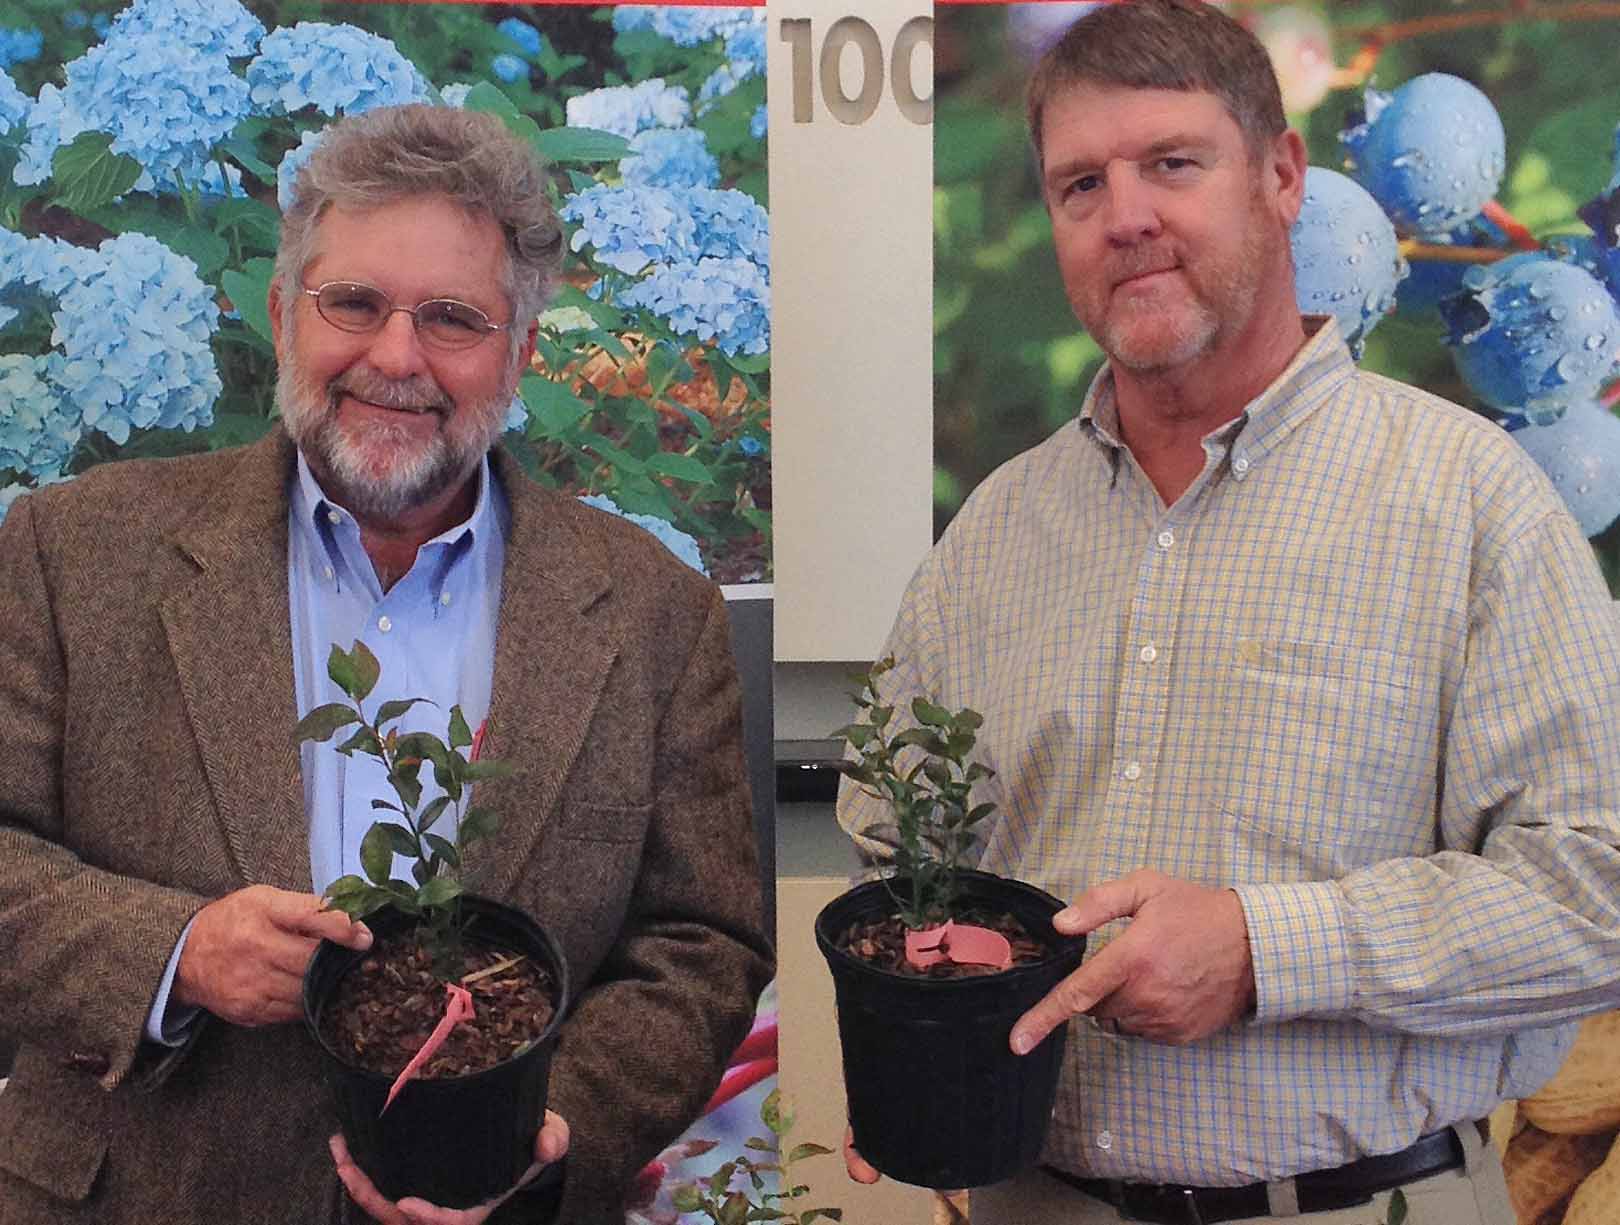 Retired UGA blueberry and small fruit horticulturist Gerard Krewer, left, holds a container of a new blueberry variety named in his honor. UGA blueberry breeder Scott NeSmith (right) named the new cultivar in honor of Krewer in recognition of his 20 years of service to Georgia's blueberry industry.